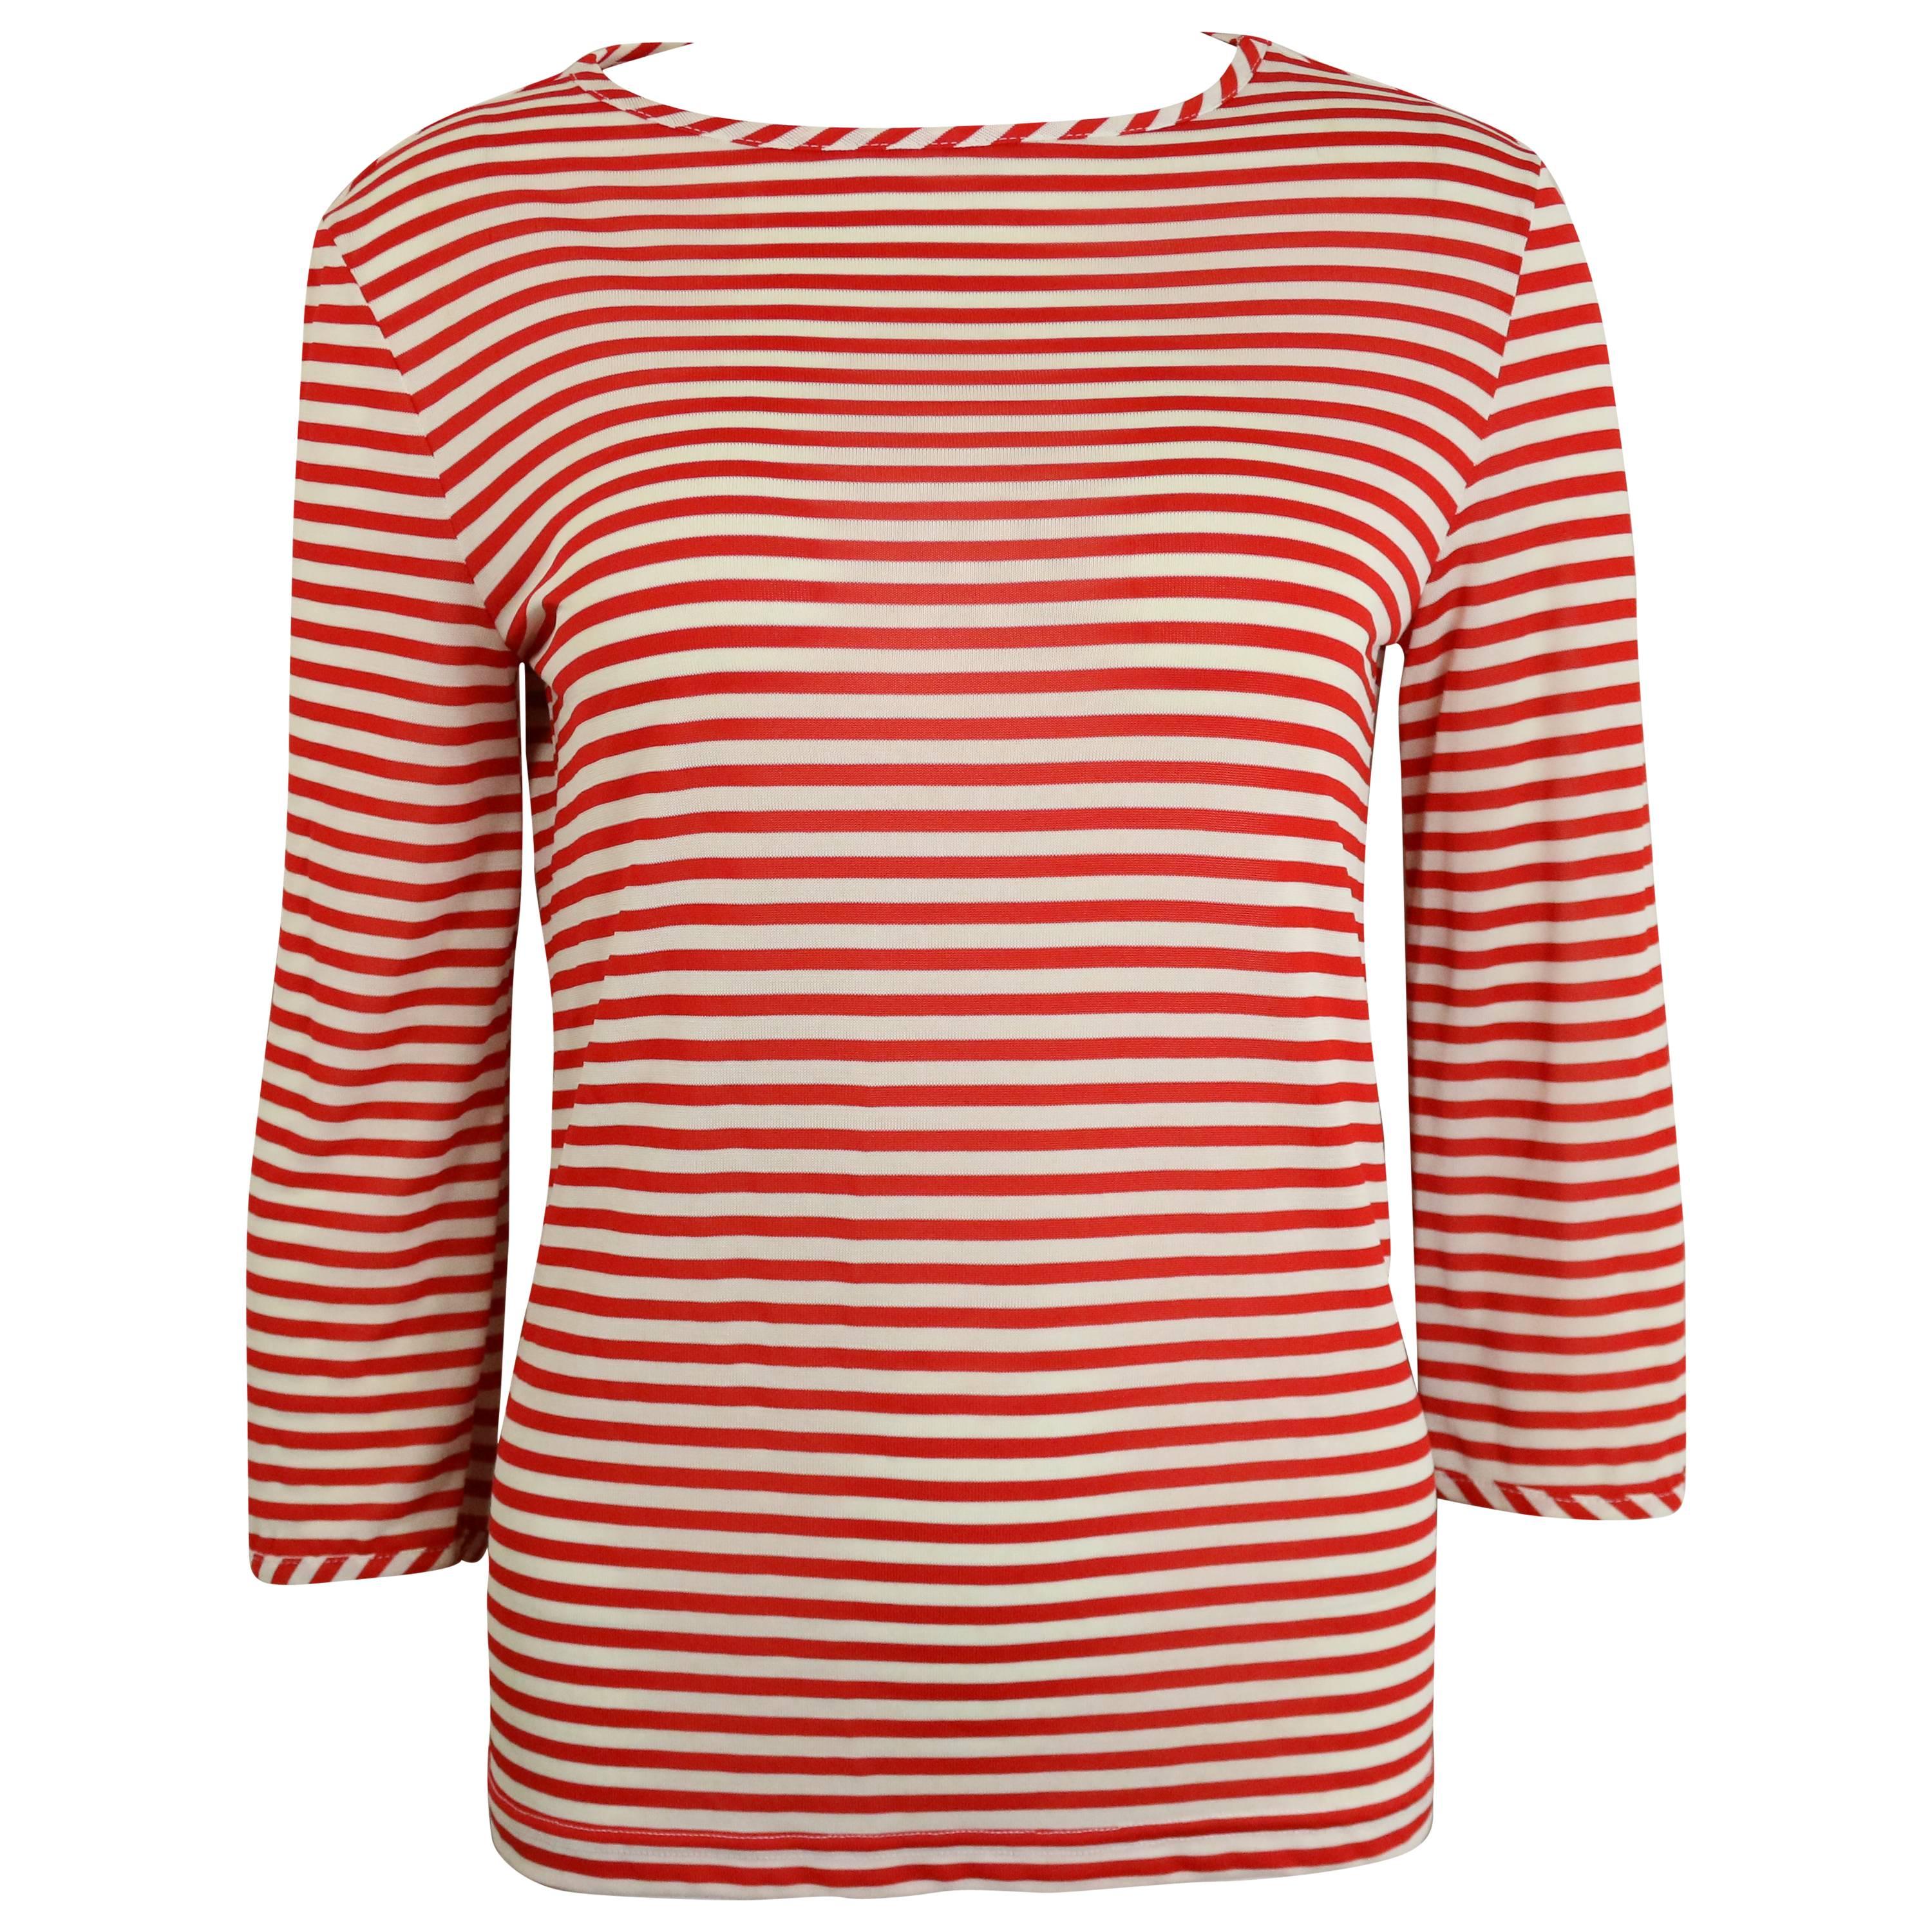 Versus By Gianni Versace Red/White Stripe Three Quarter Sleeve Top For Sale